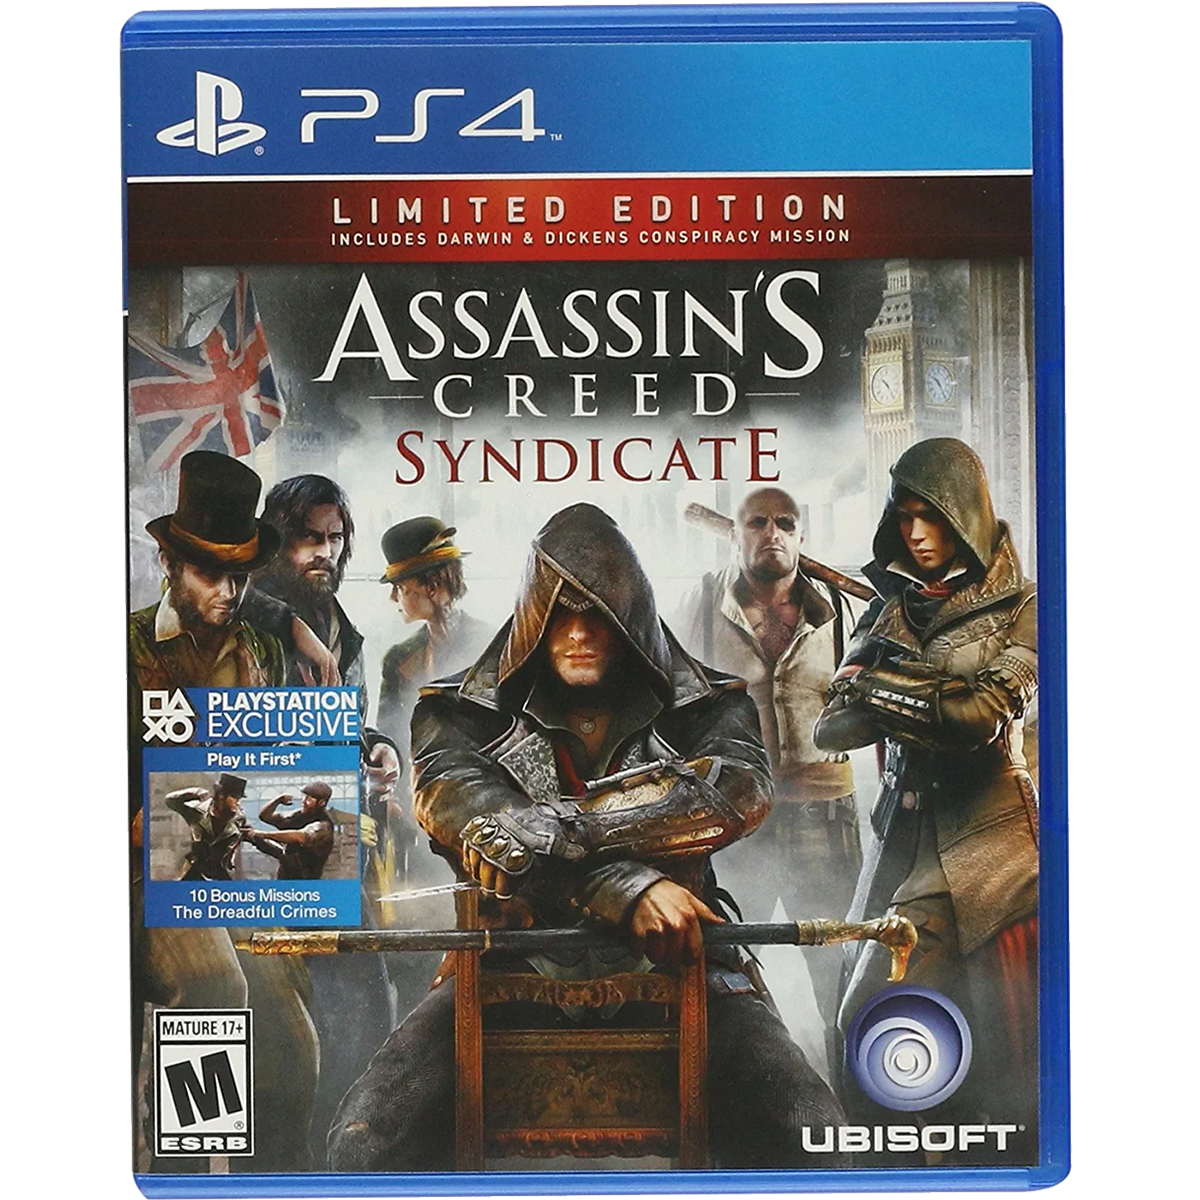 PS4 Assassin's Creed: Syndicate